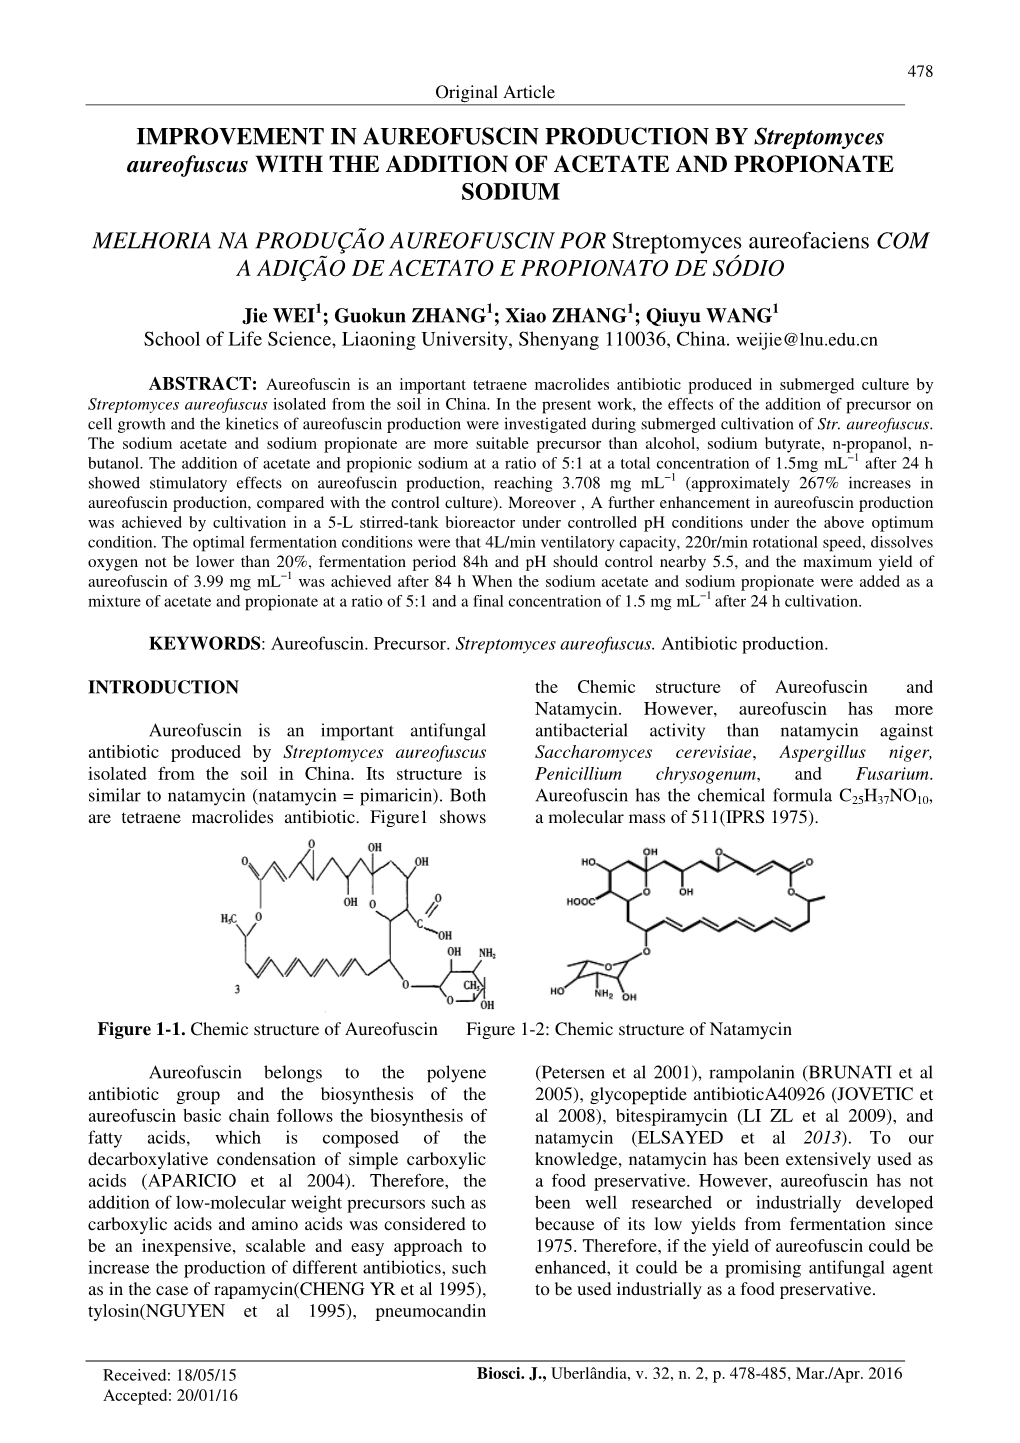 IMPROVEMENT in AUREOFUSCIN PRODUCTION by Streptomyces Aureofuscus with the ADDITION of ACETATE and PROPIONATE SODIUM